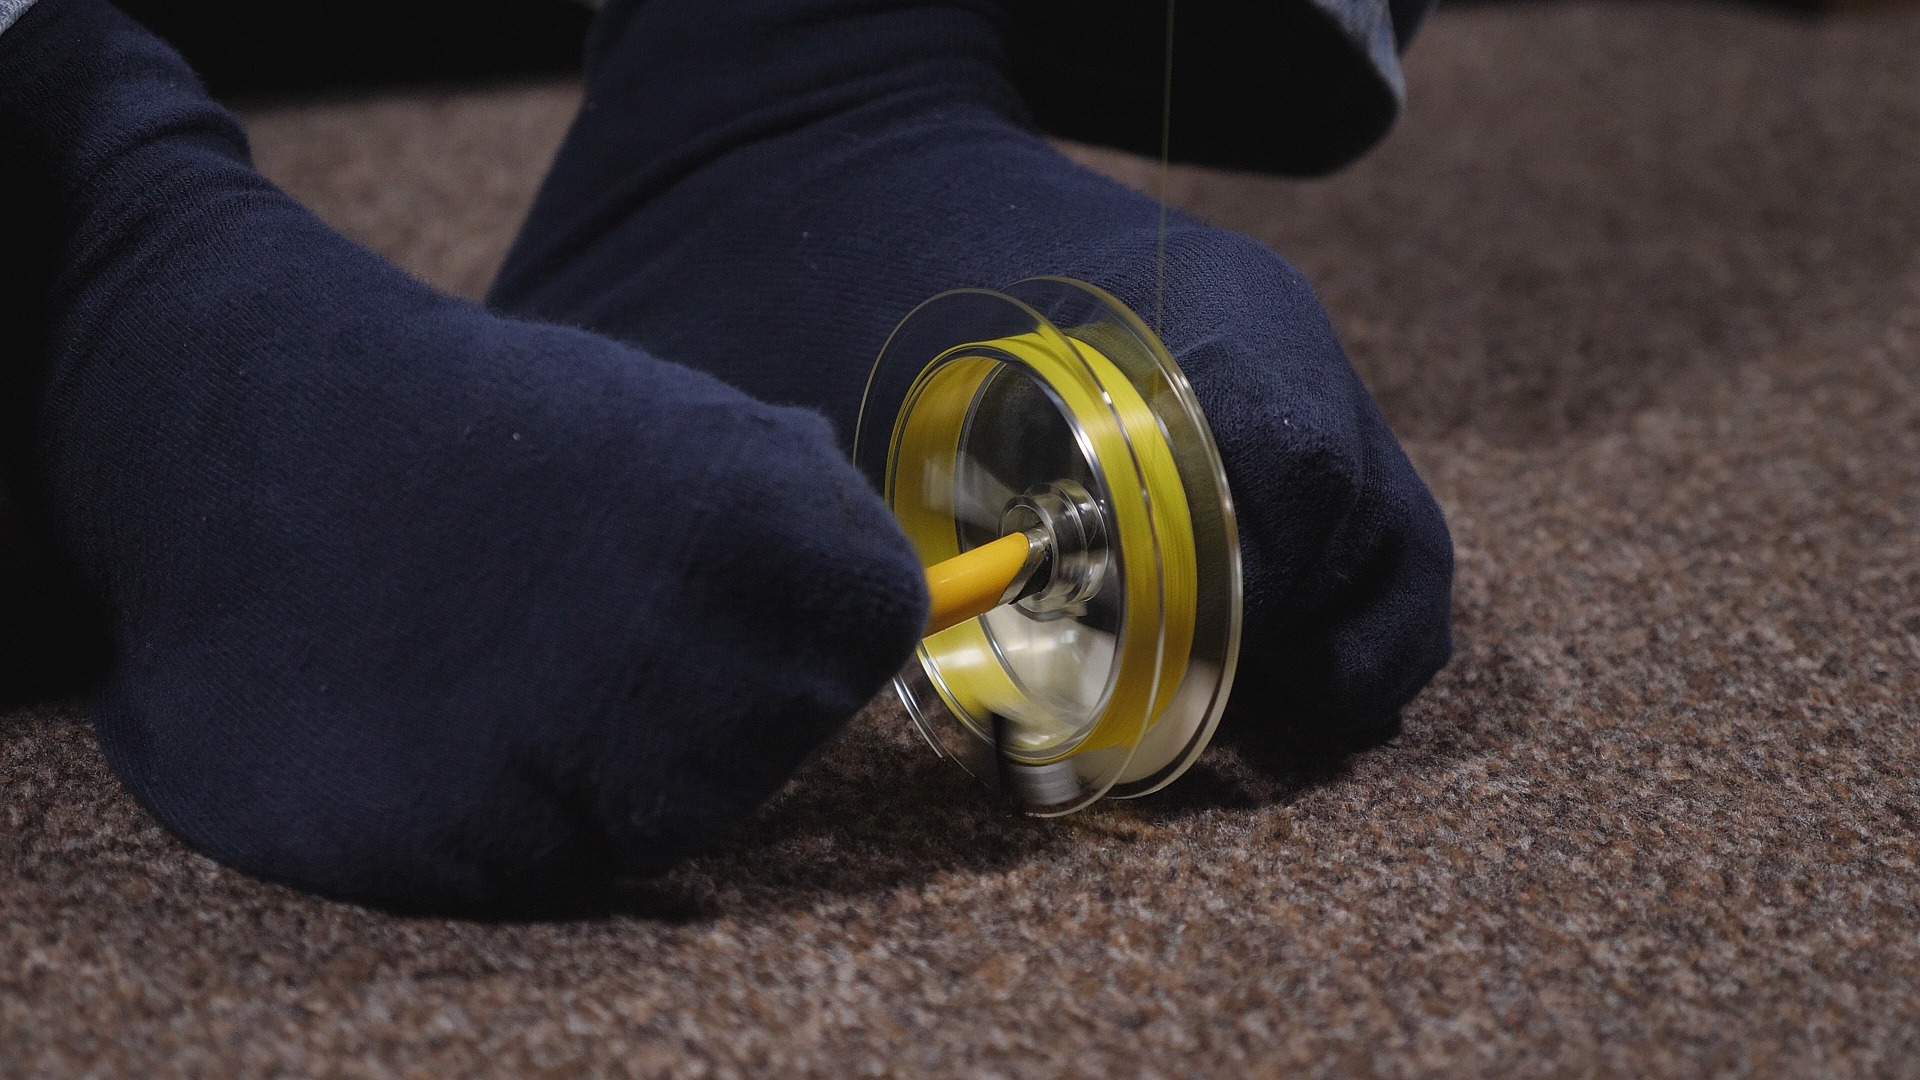 Maintaining light tension when spooling a reel